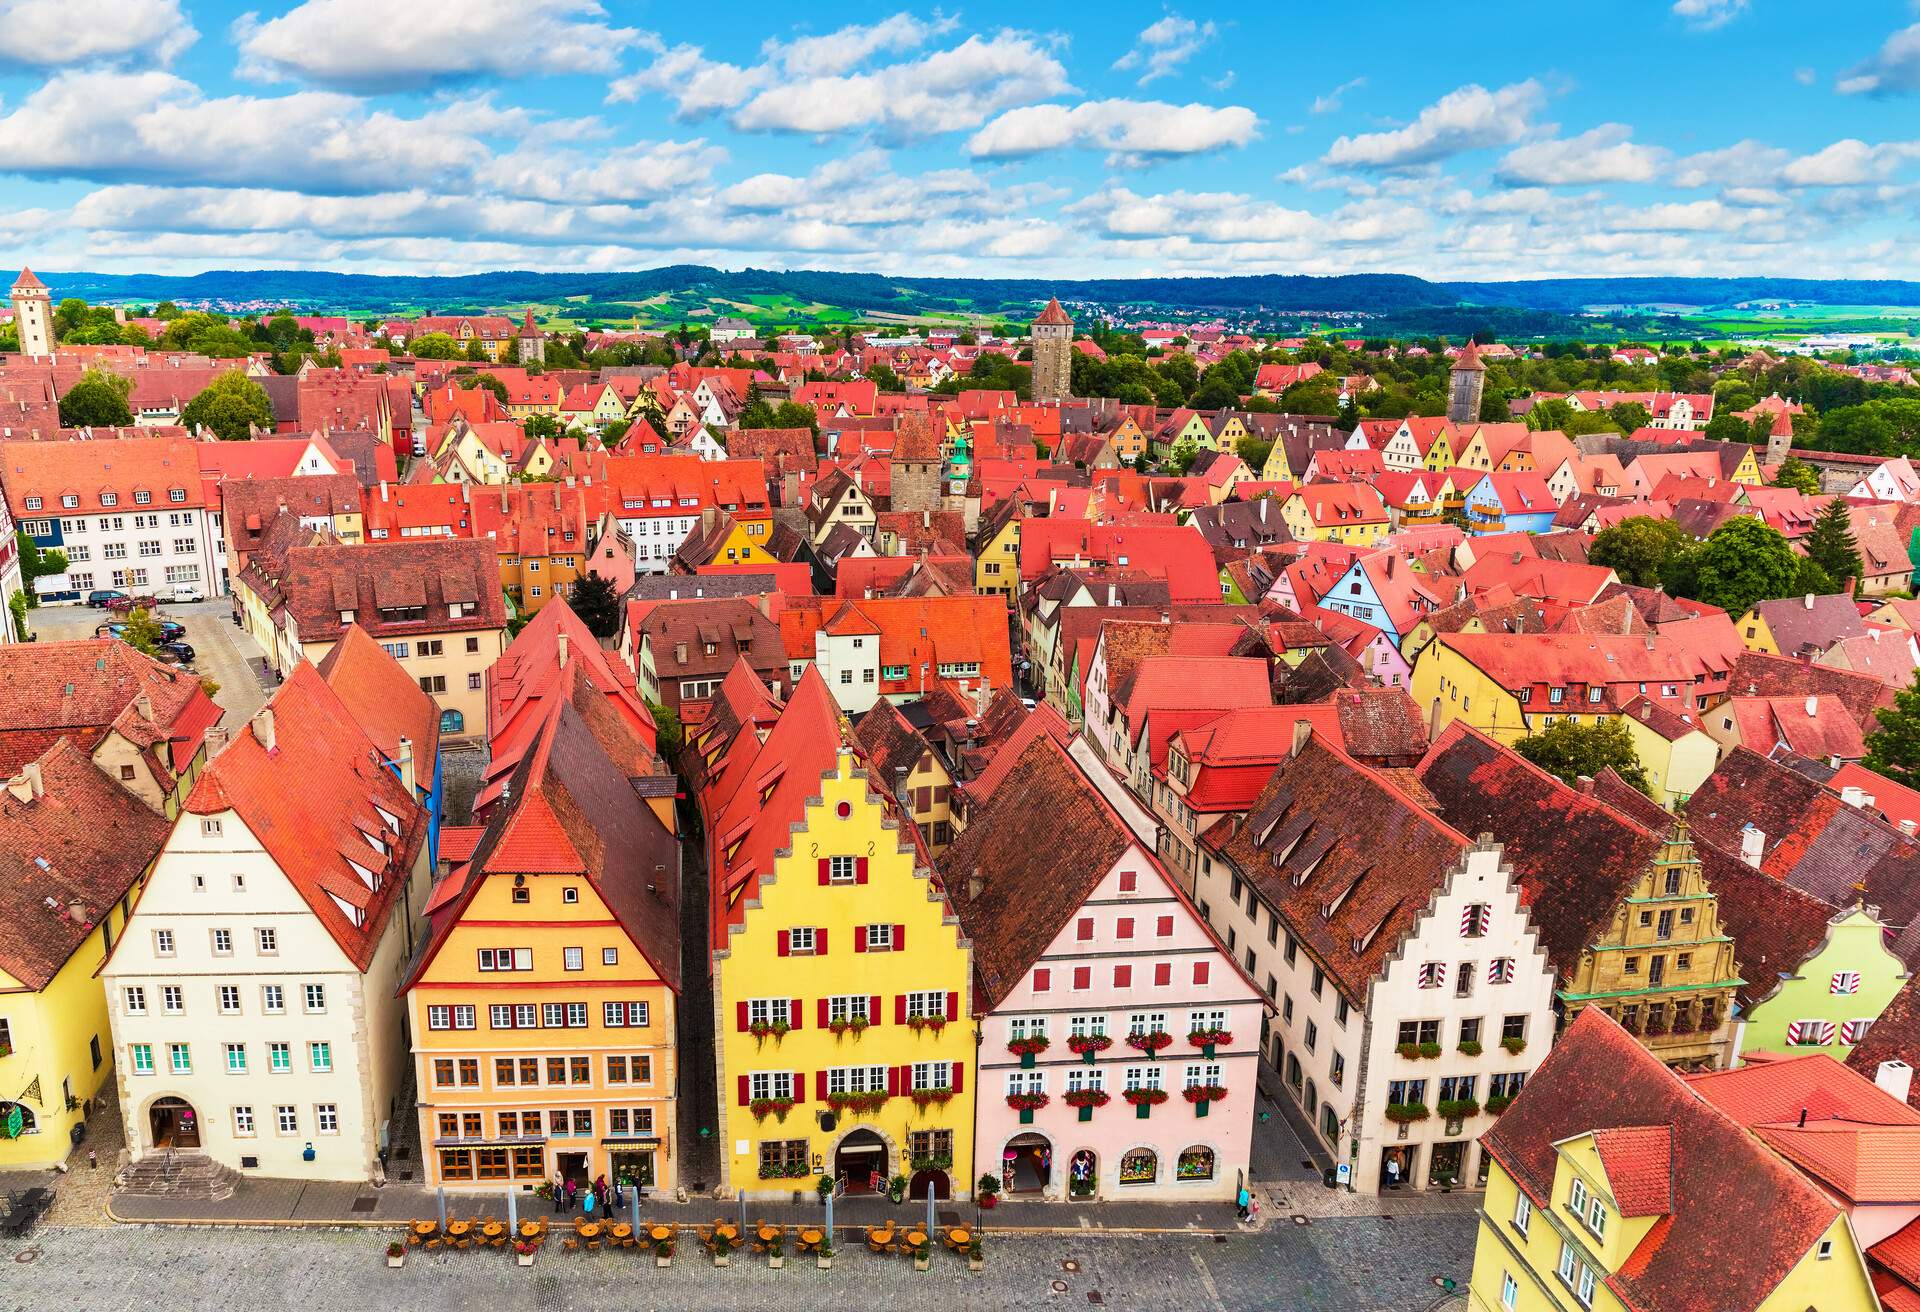 Scenic summer aerial panorama of the Old Town architecture and Market Square in Rothenburg ob der Tauber, Bavaria, Germany